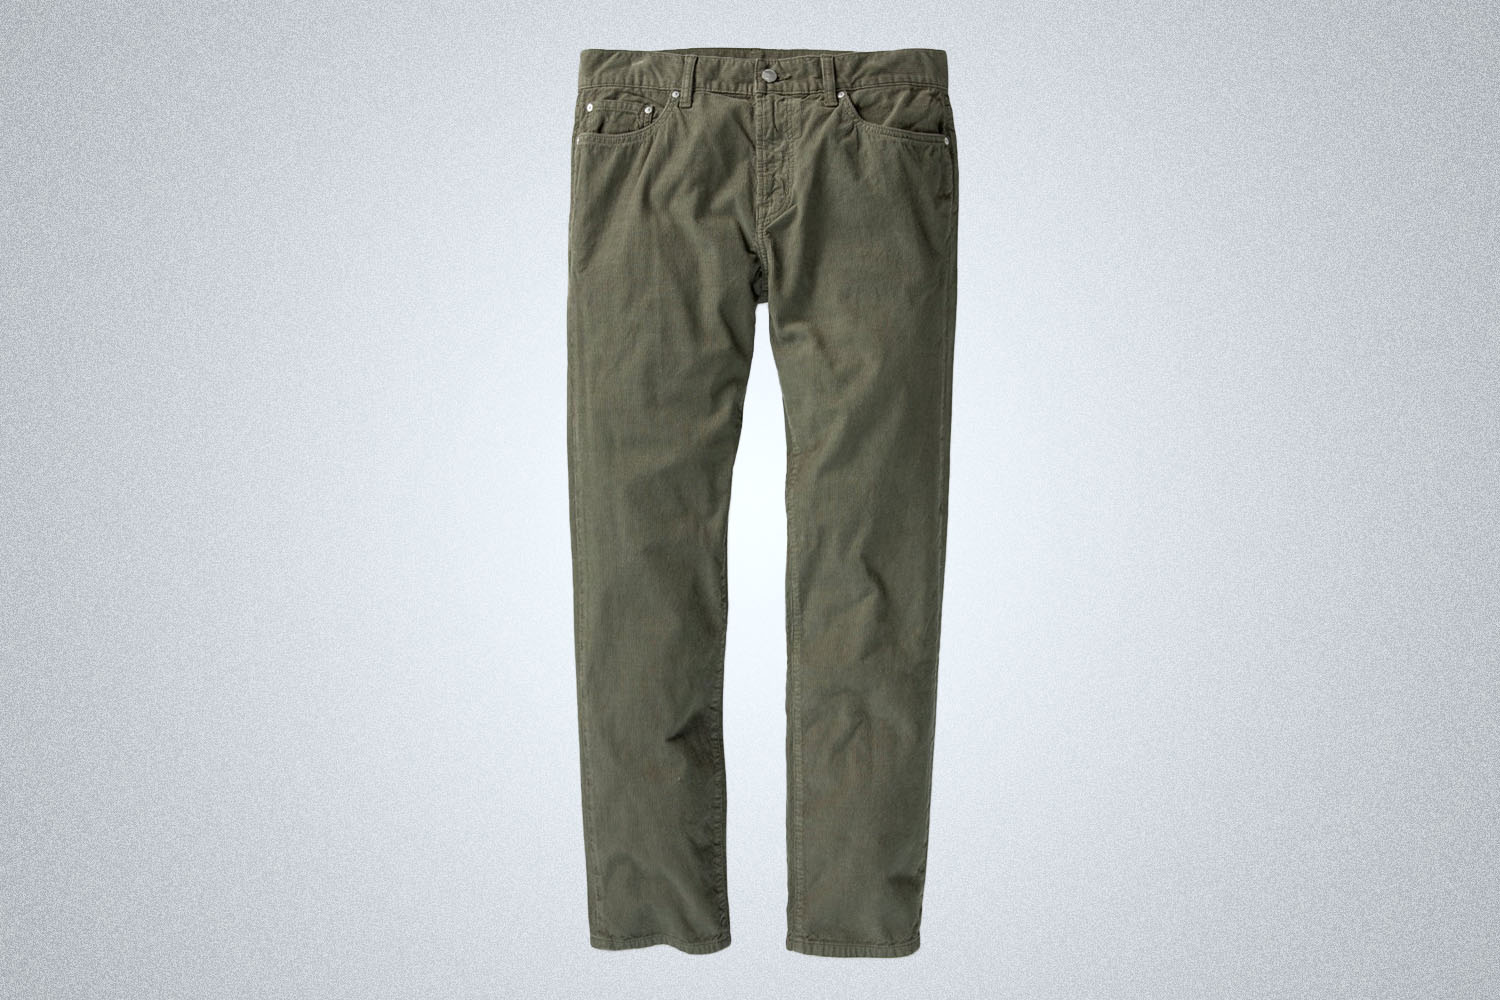 a pair of green cord pants